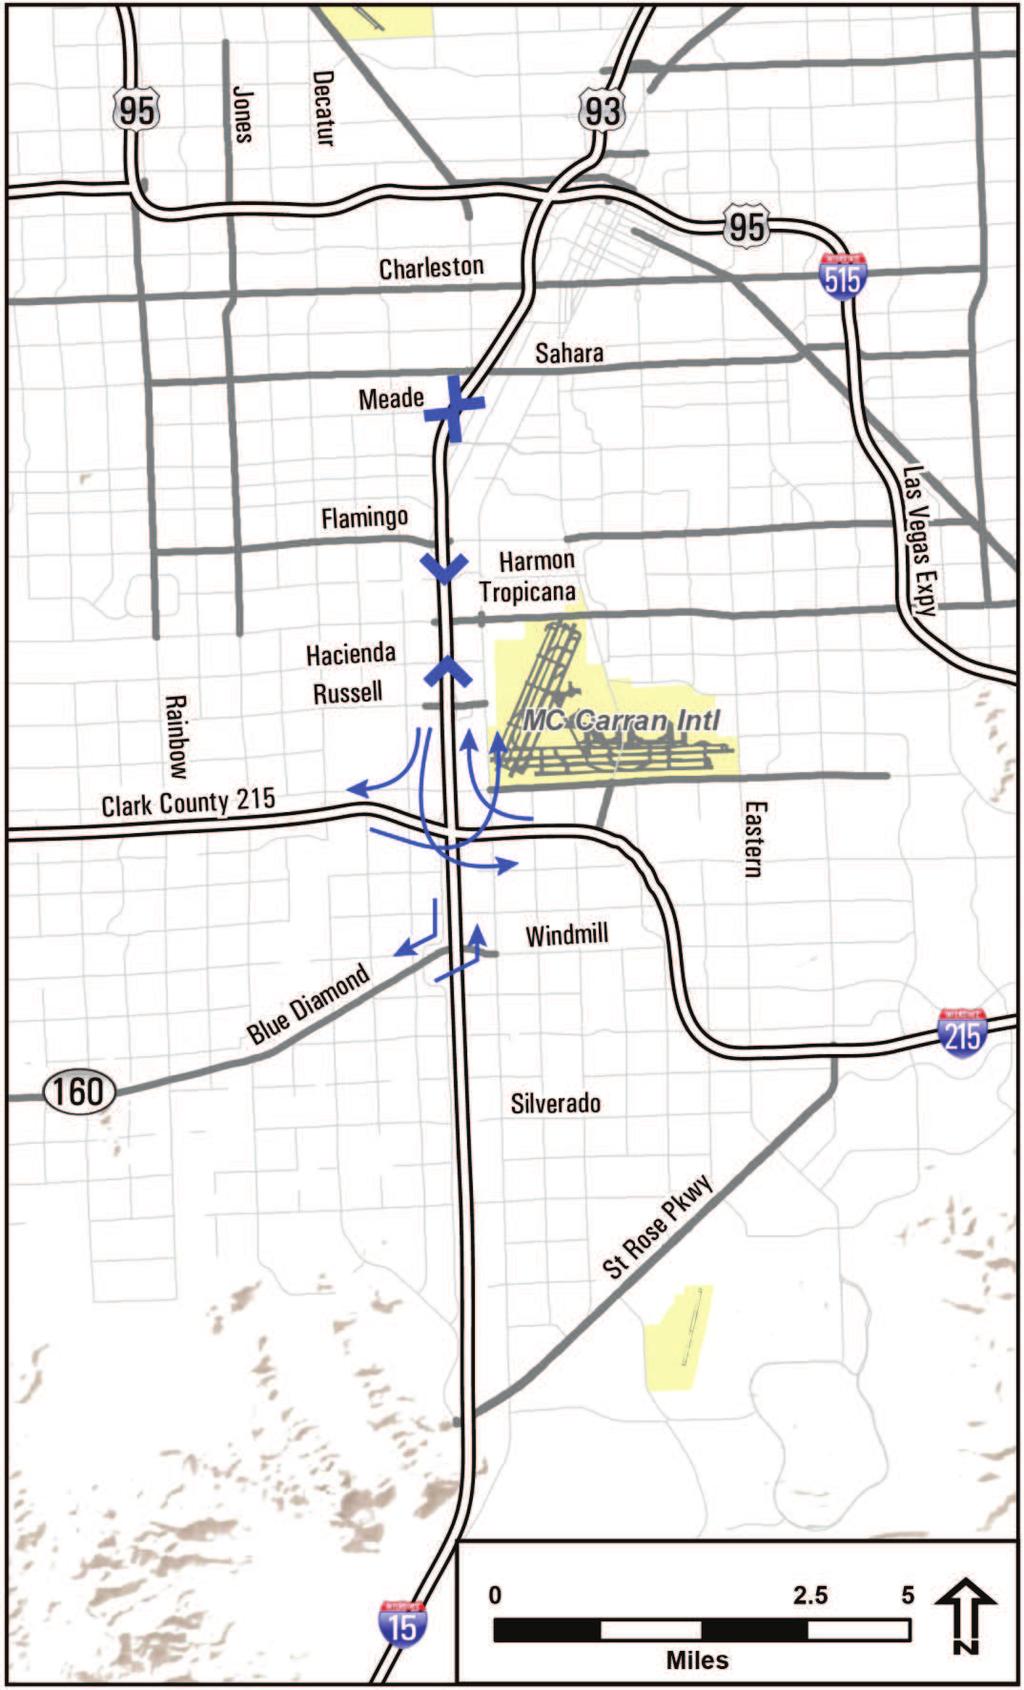 Meade Avenue (ramps to/from both directions) I-15/I-215 interchange direct-access flyover ramps (ramps to/from the north - from/to the east and ramps to/from the north - from/to the west) Figure 4-1